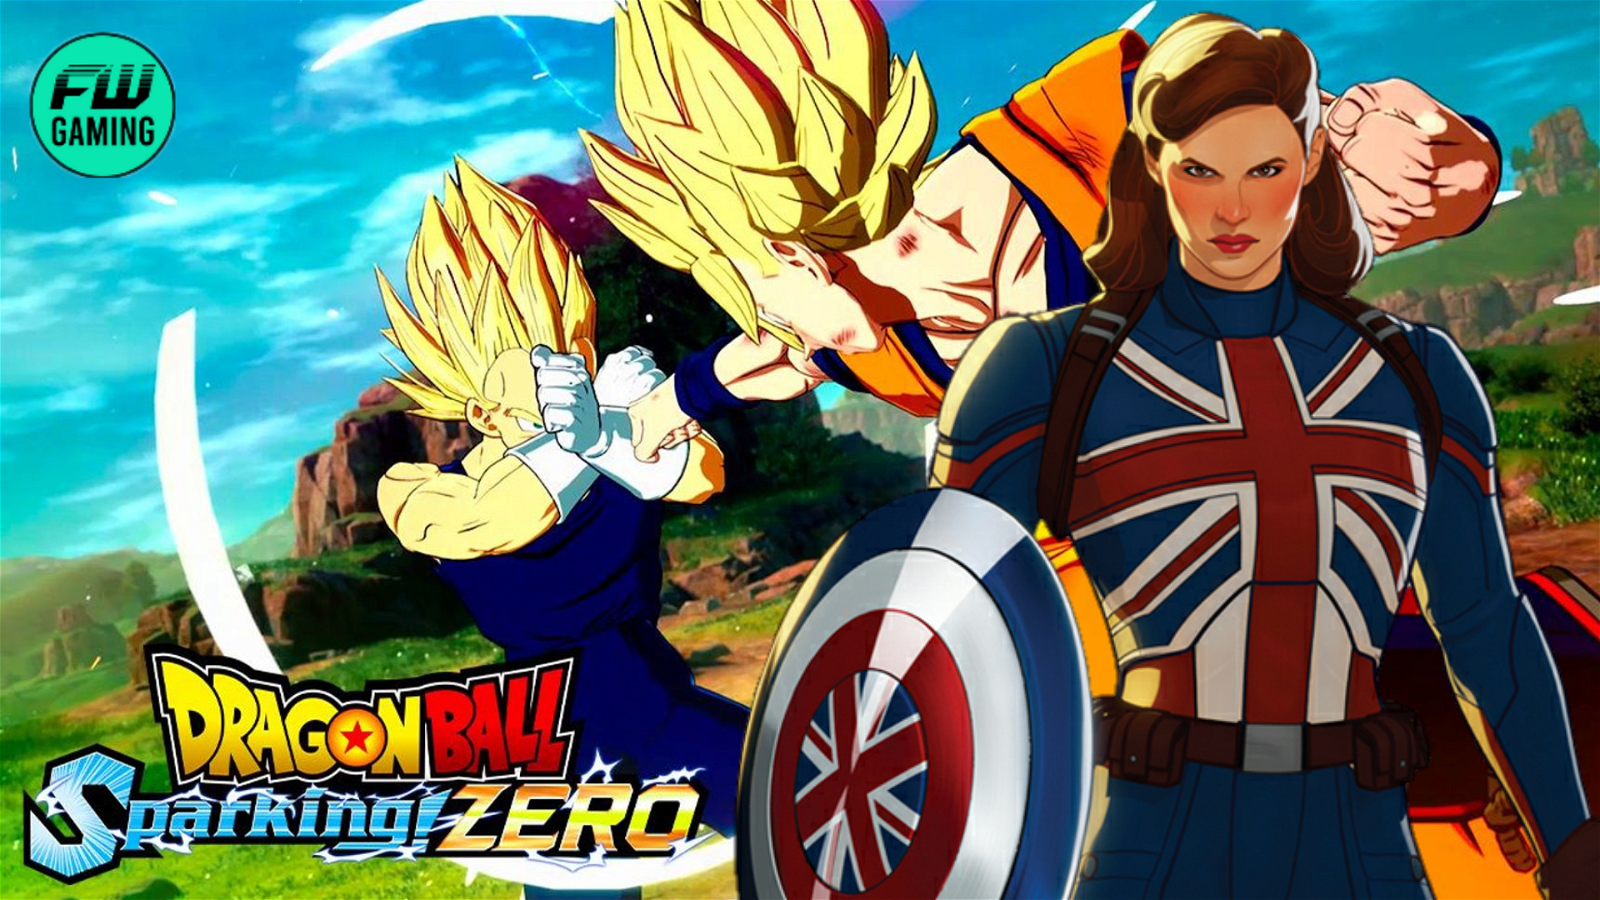 Dragon Ball: Sparking Zero Fans Agree It Should Copy One Marvel Show and Include One 'Must-Have' Feature to Push the Anime Fighting Game to the Top